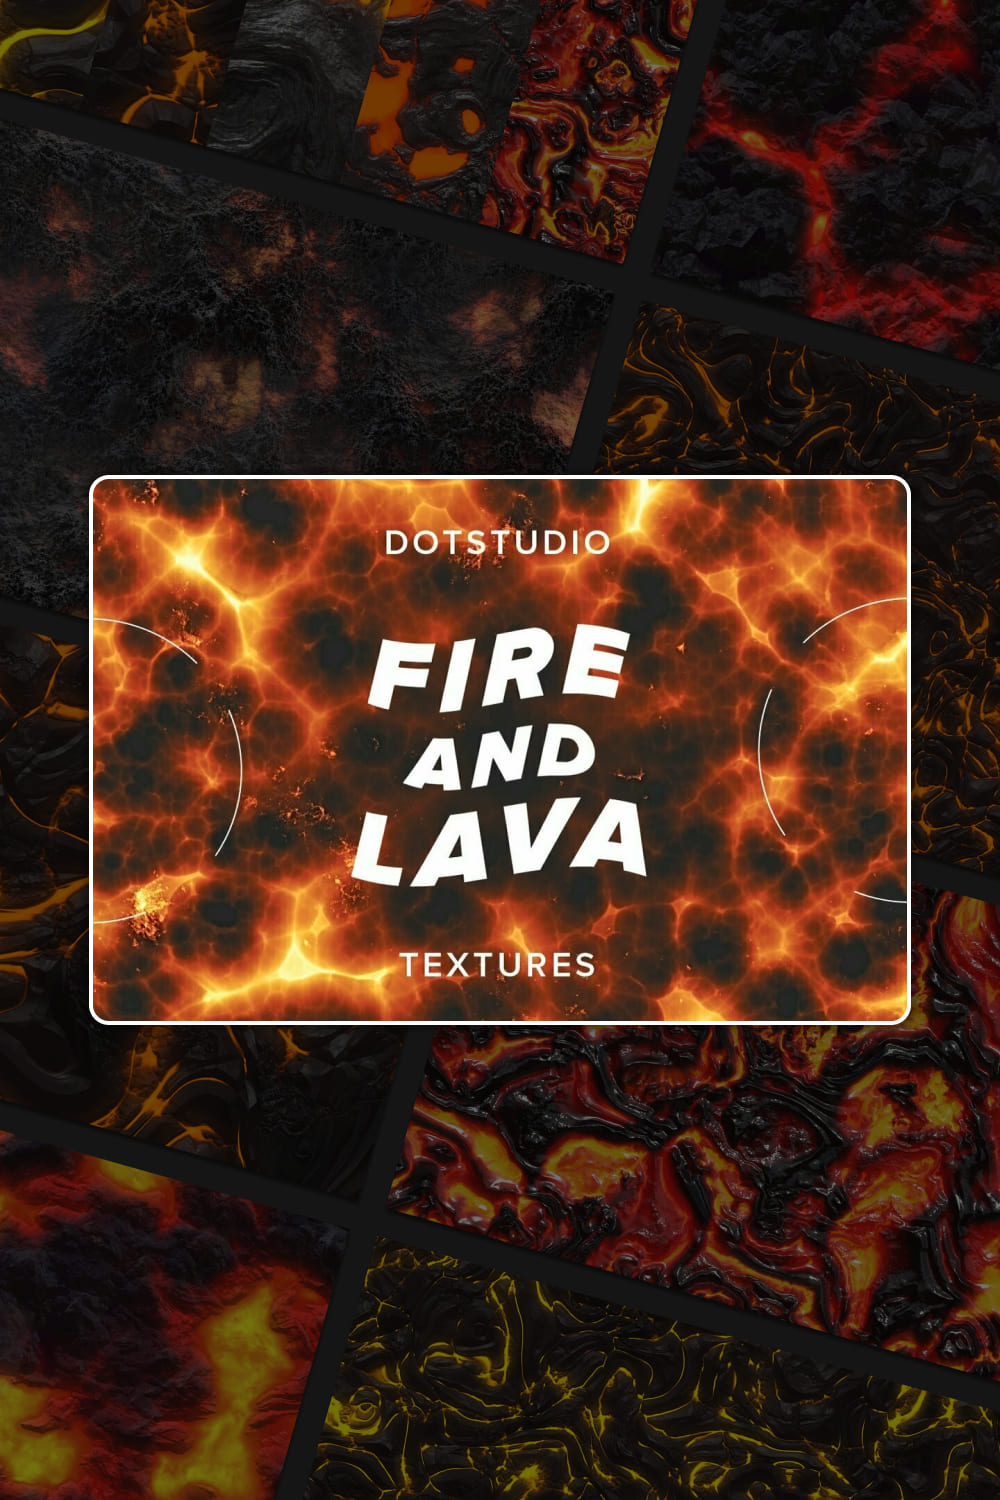 Fire and lava textures - pinterest image preview.